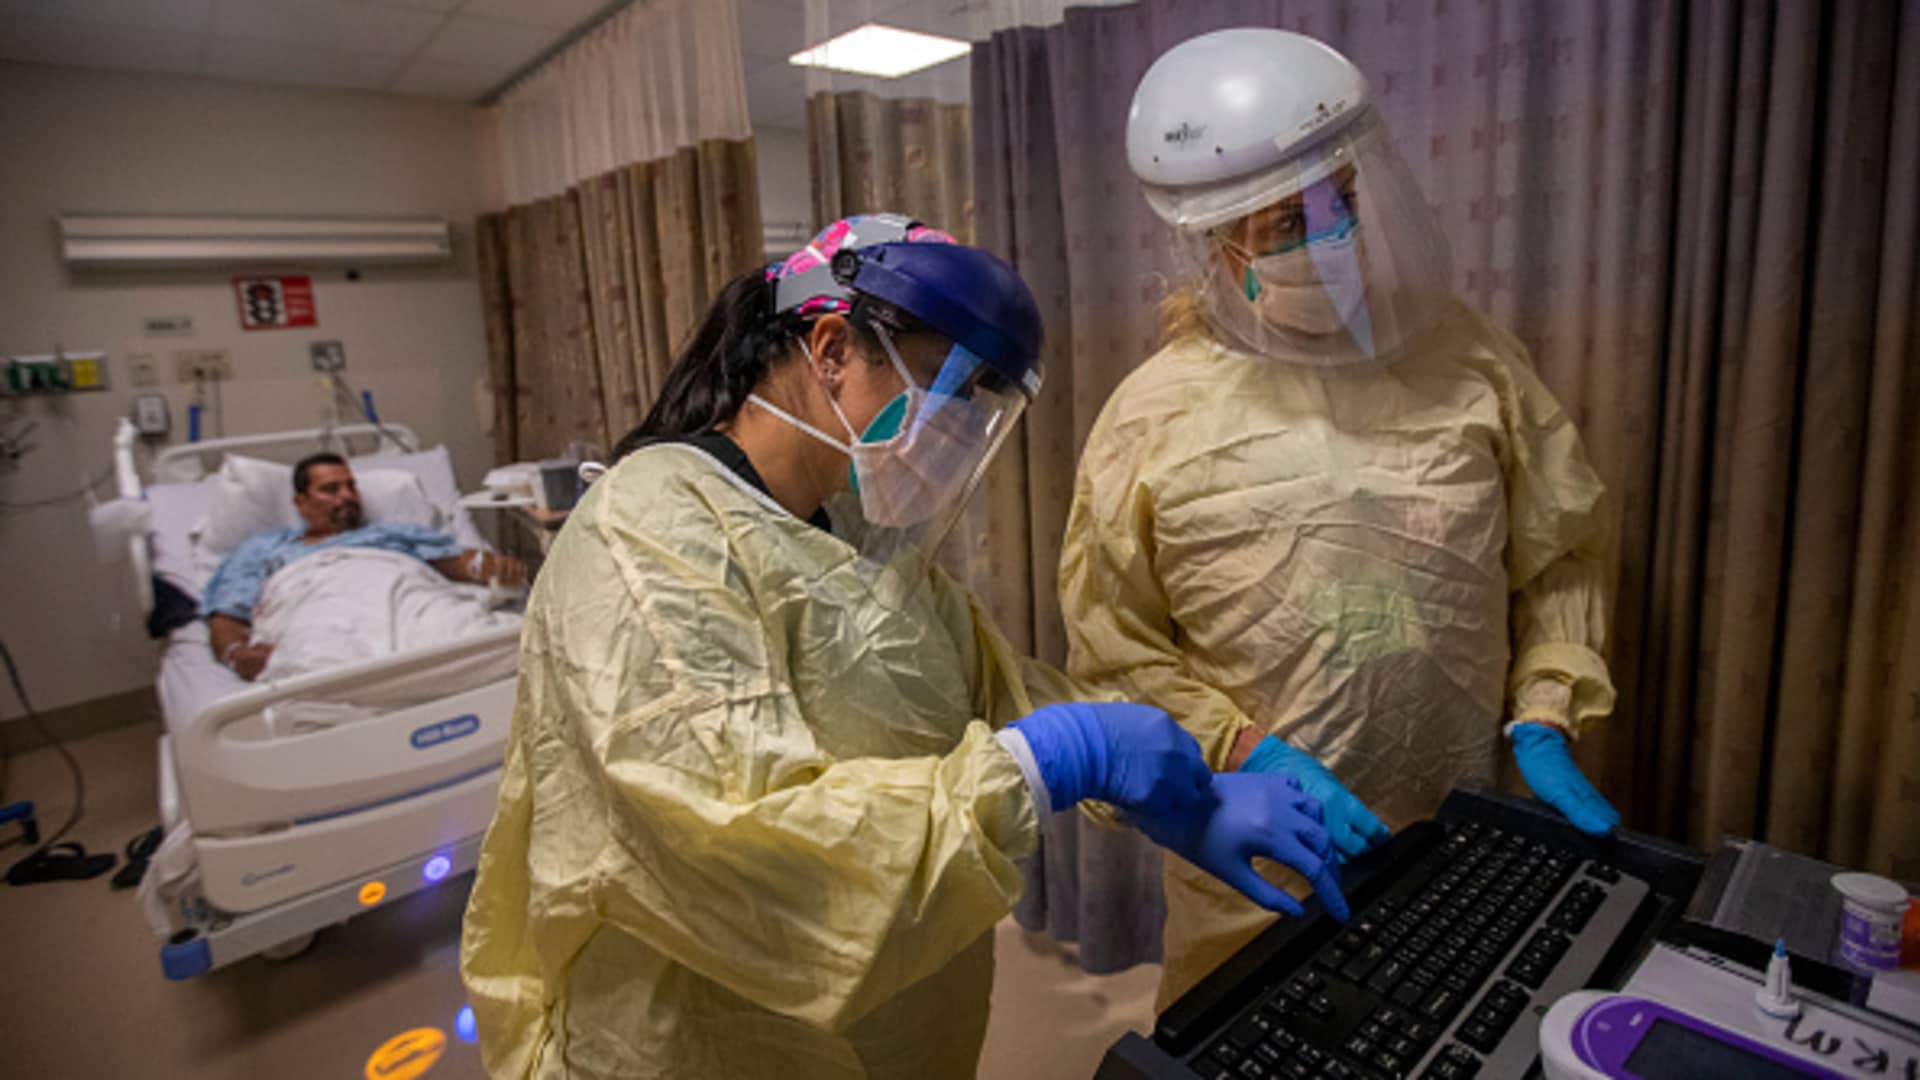 Kim Dimaunahan, RN, left, and Courtney Herron, RN, right, are working in the covid unit inside Little Company of Mary Medical Center Friday, July 30, 2021 in Torrance, CA.